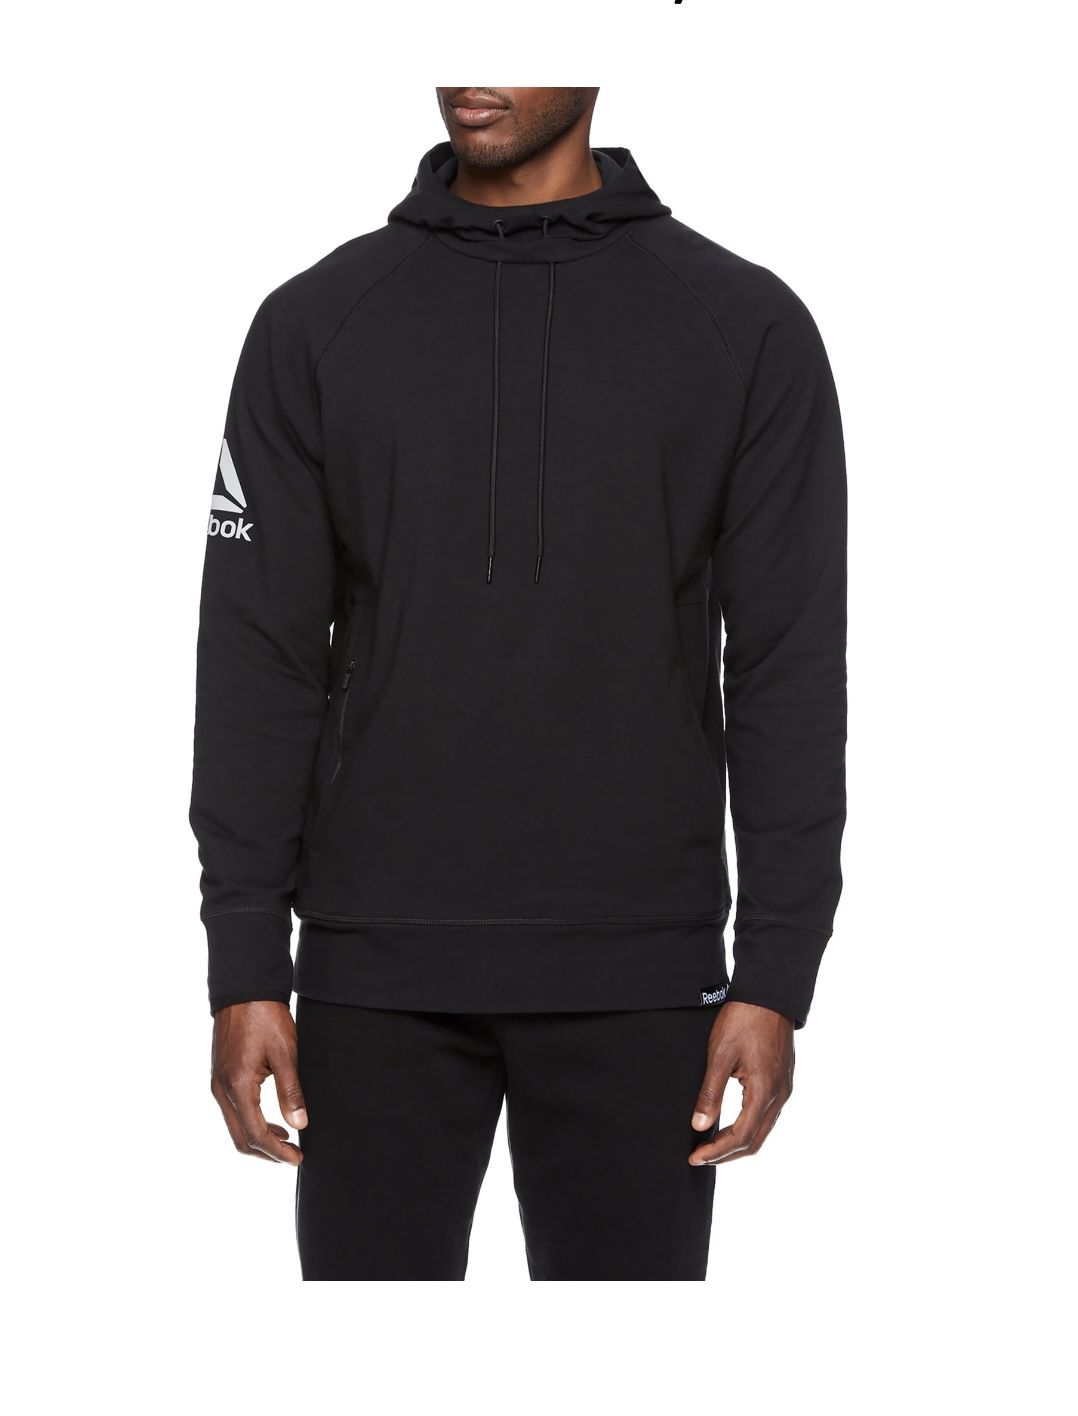 Reebok Active Dynamic Pullover Hoodie, up to Size S